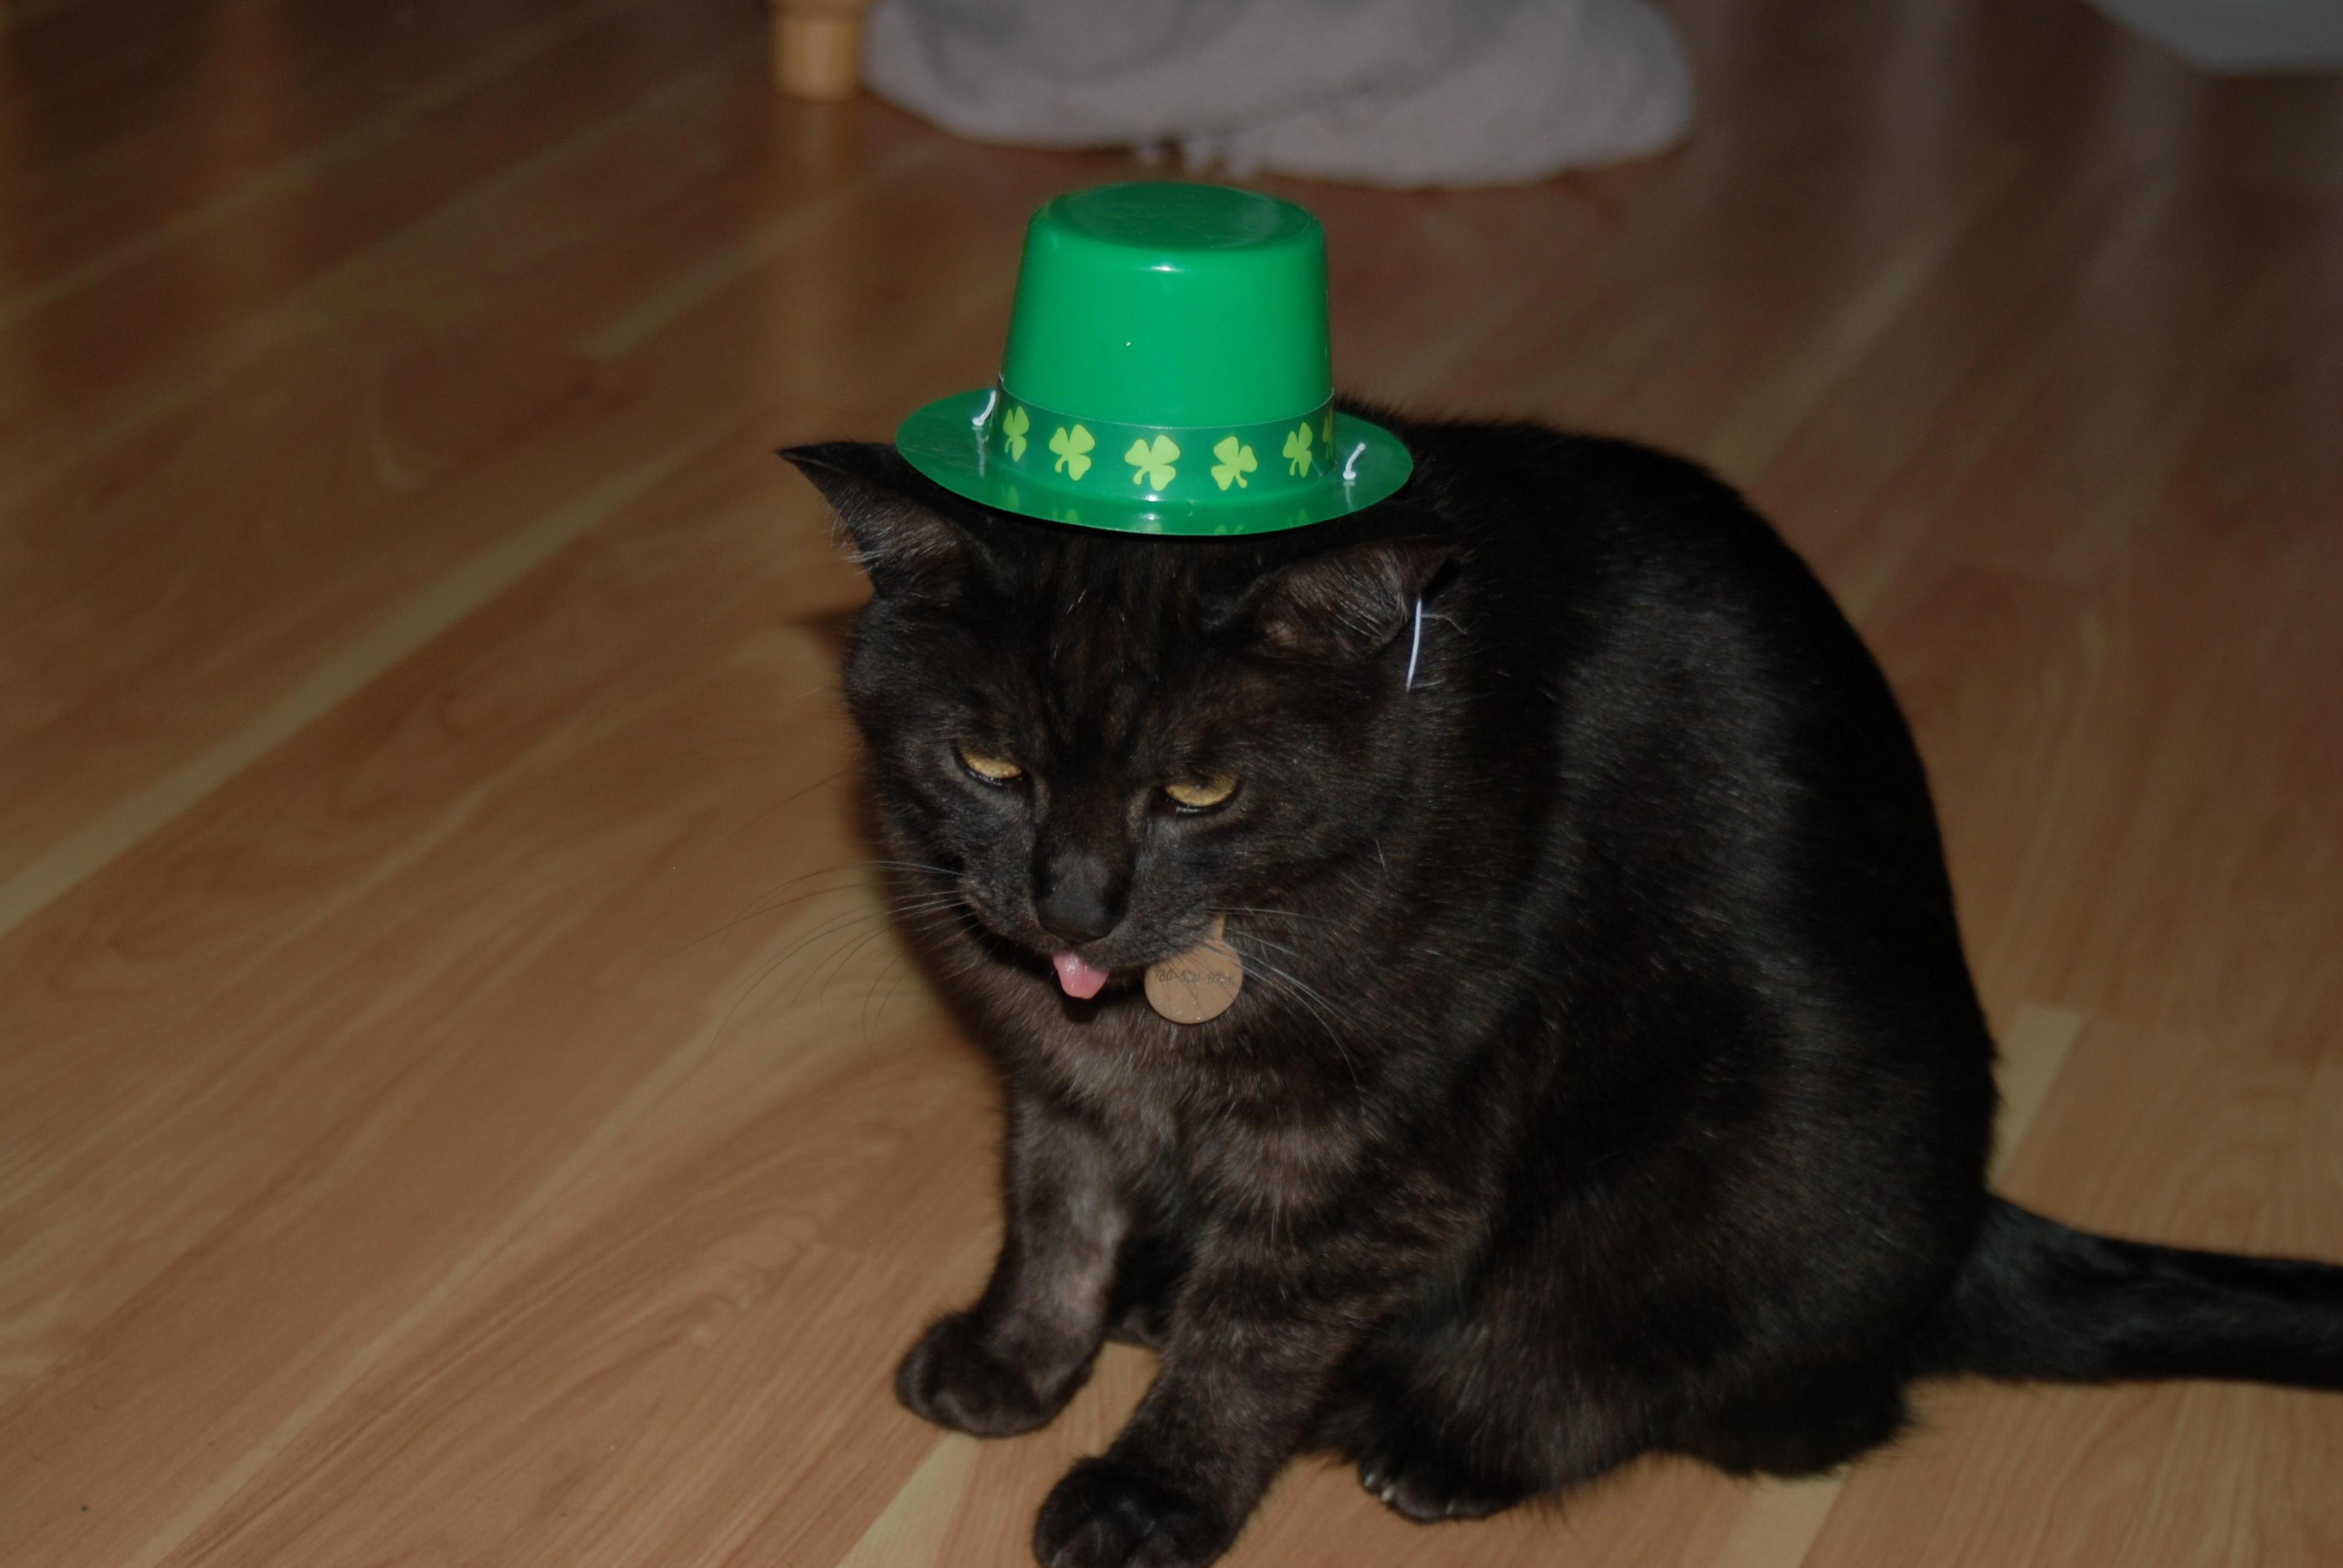 Zeppelin wants to wish you a happy st. patricks day